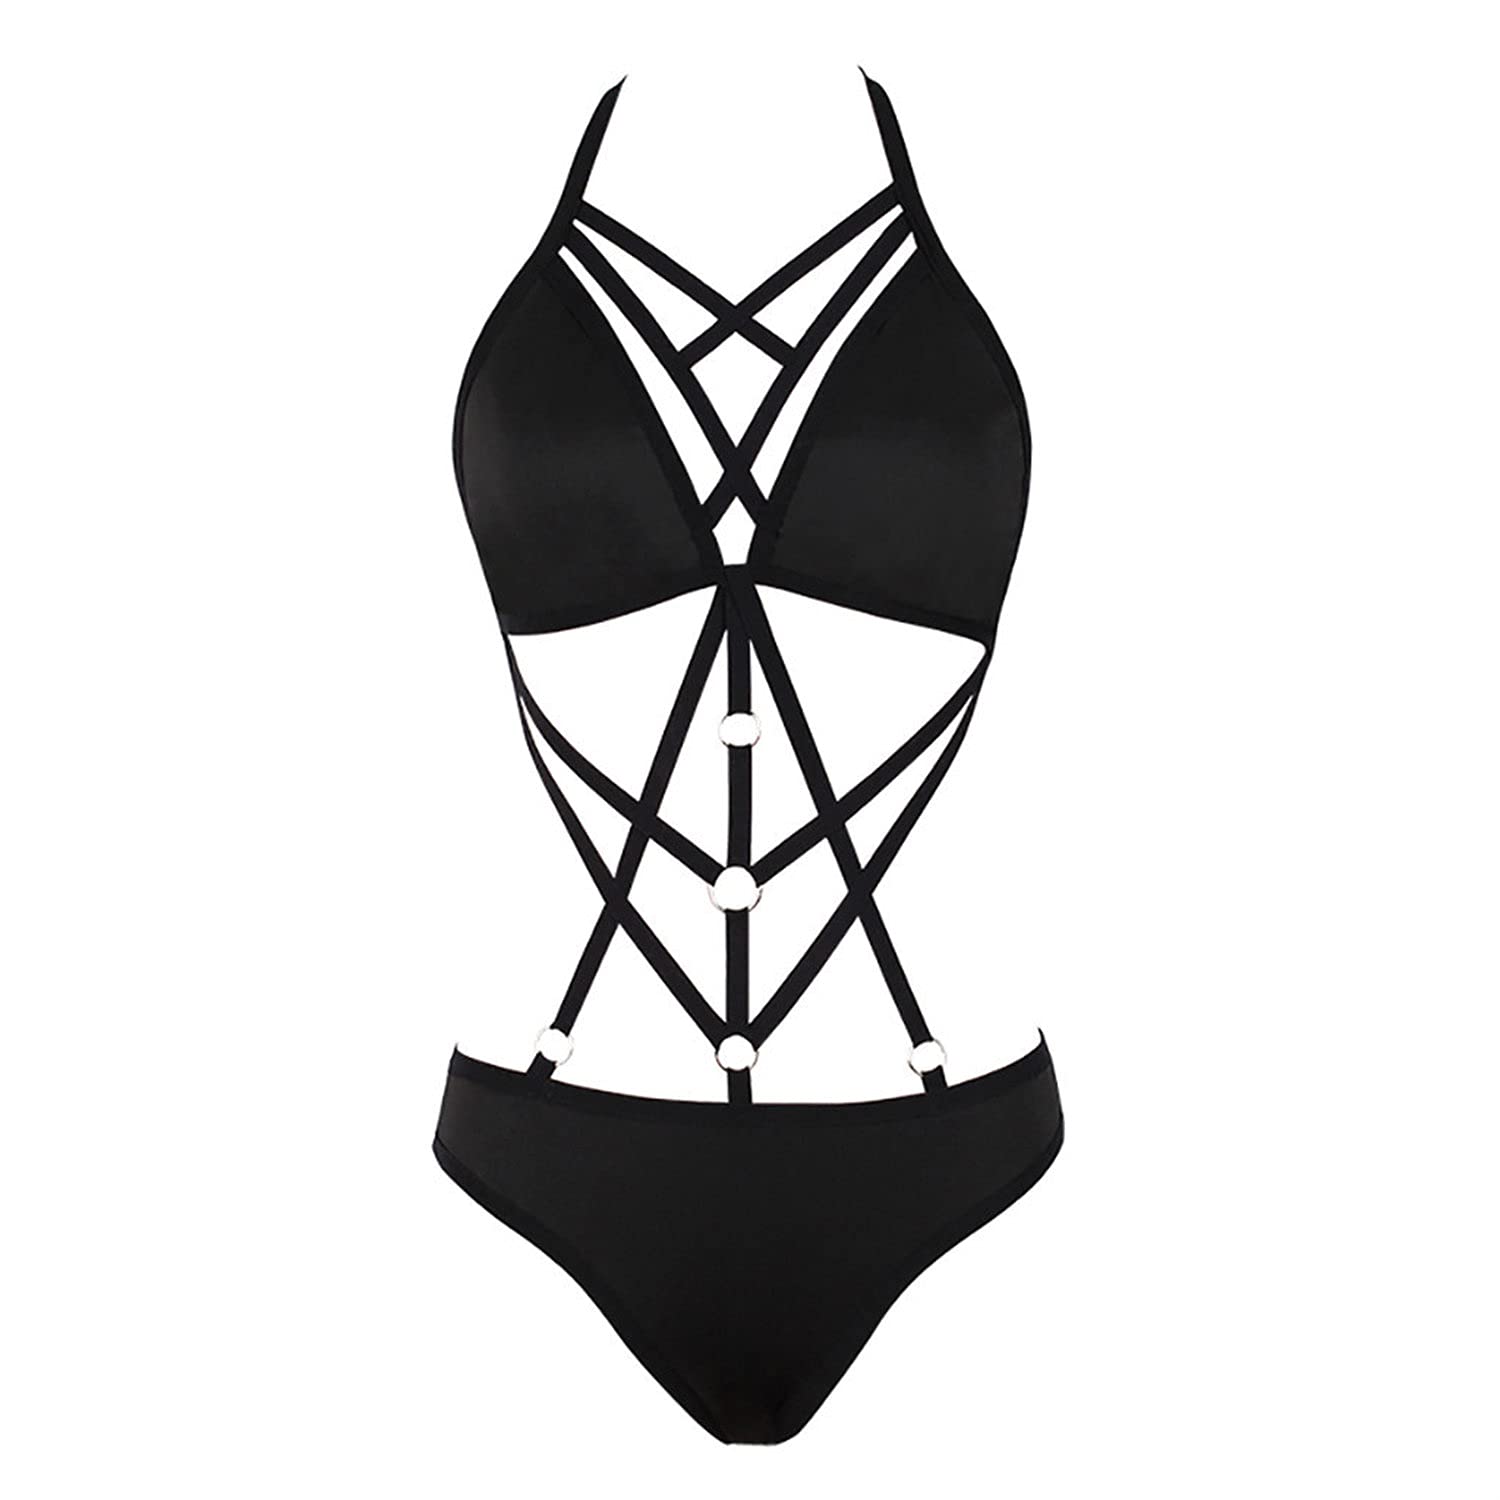 Women's Punk Body Harness Lingerie Sexy Hollow Out Teddy One Piece